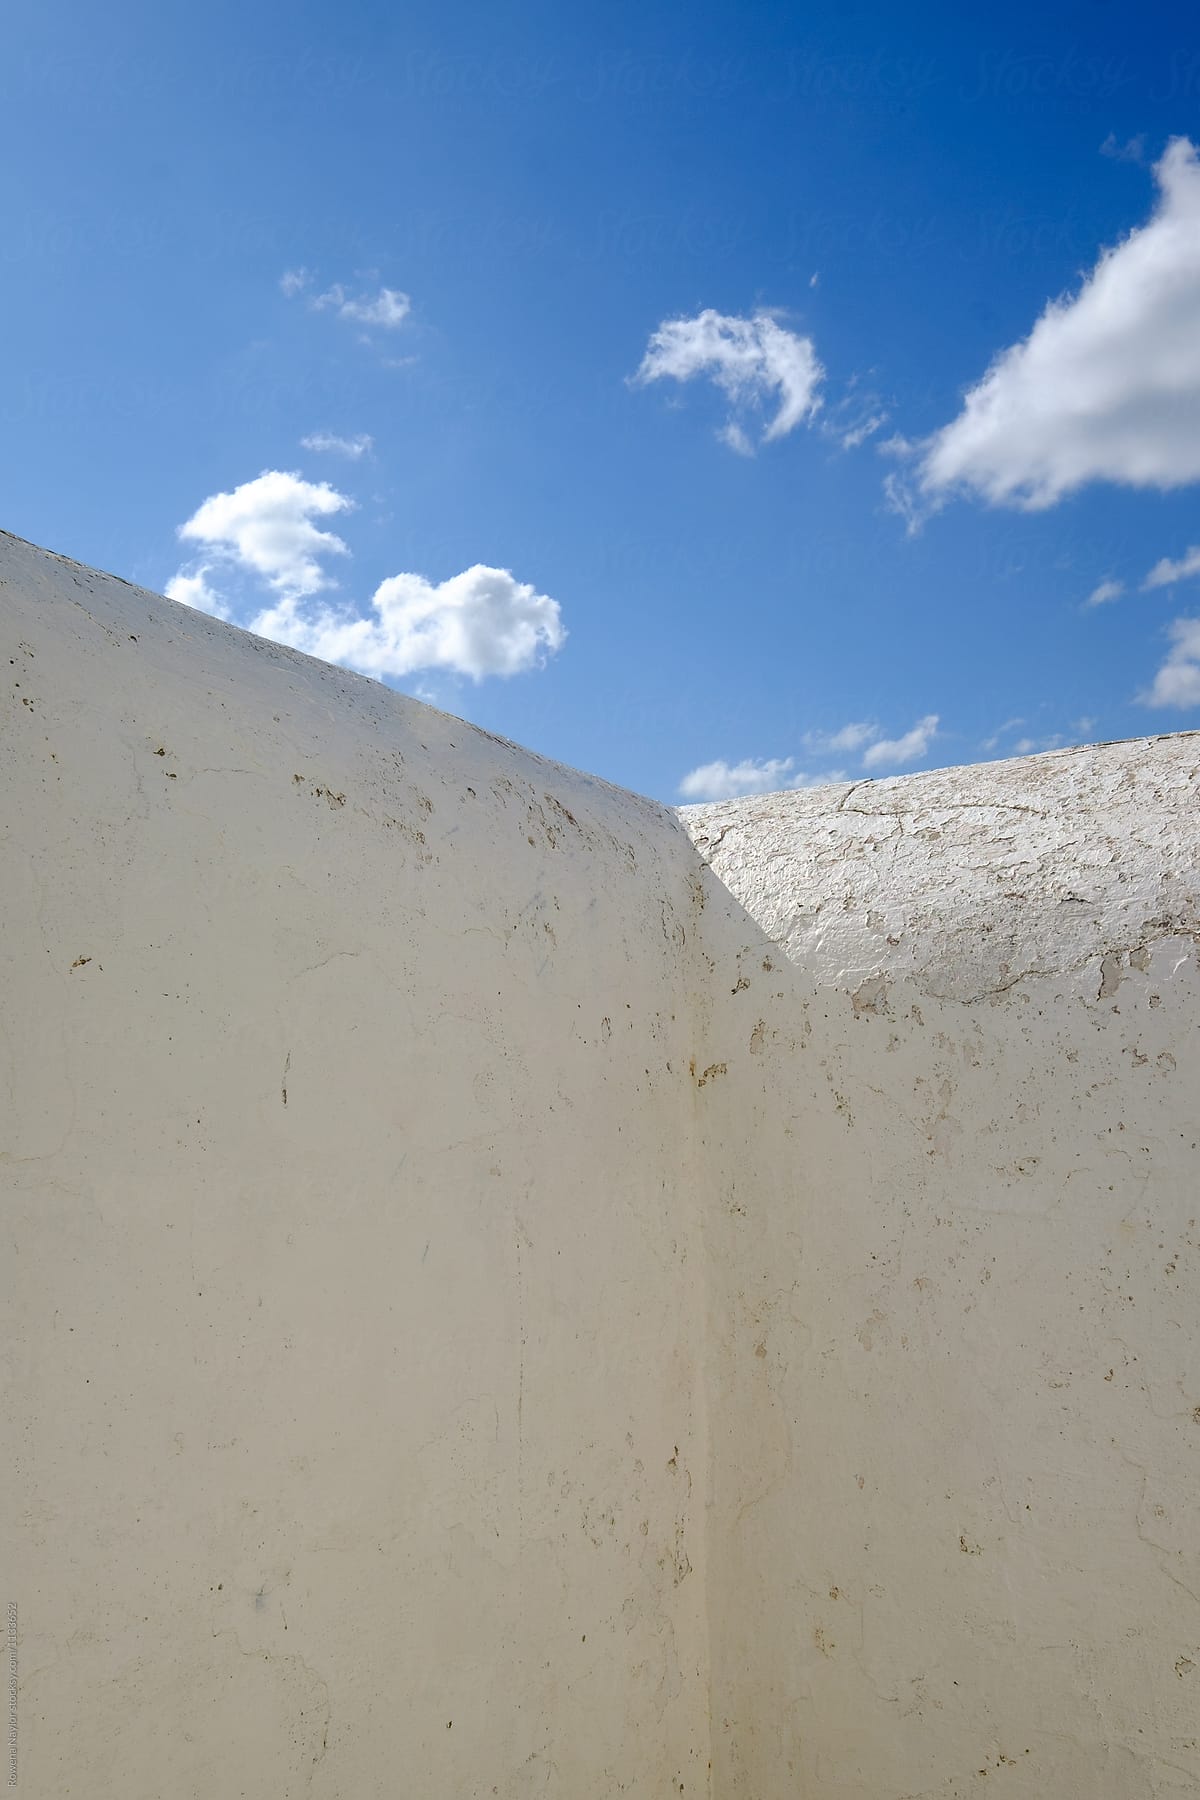 Large white wall against a blue sky